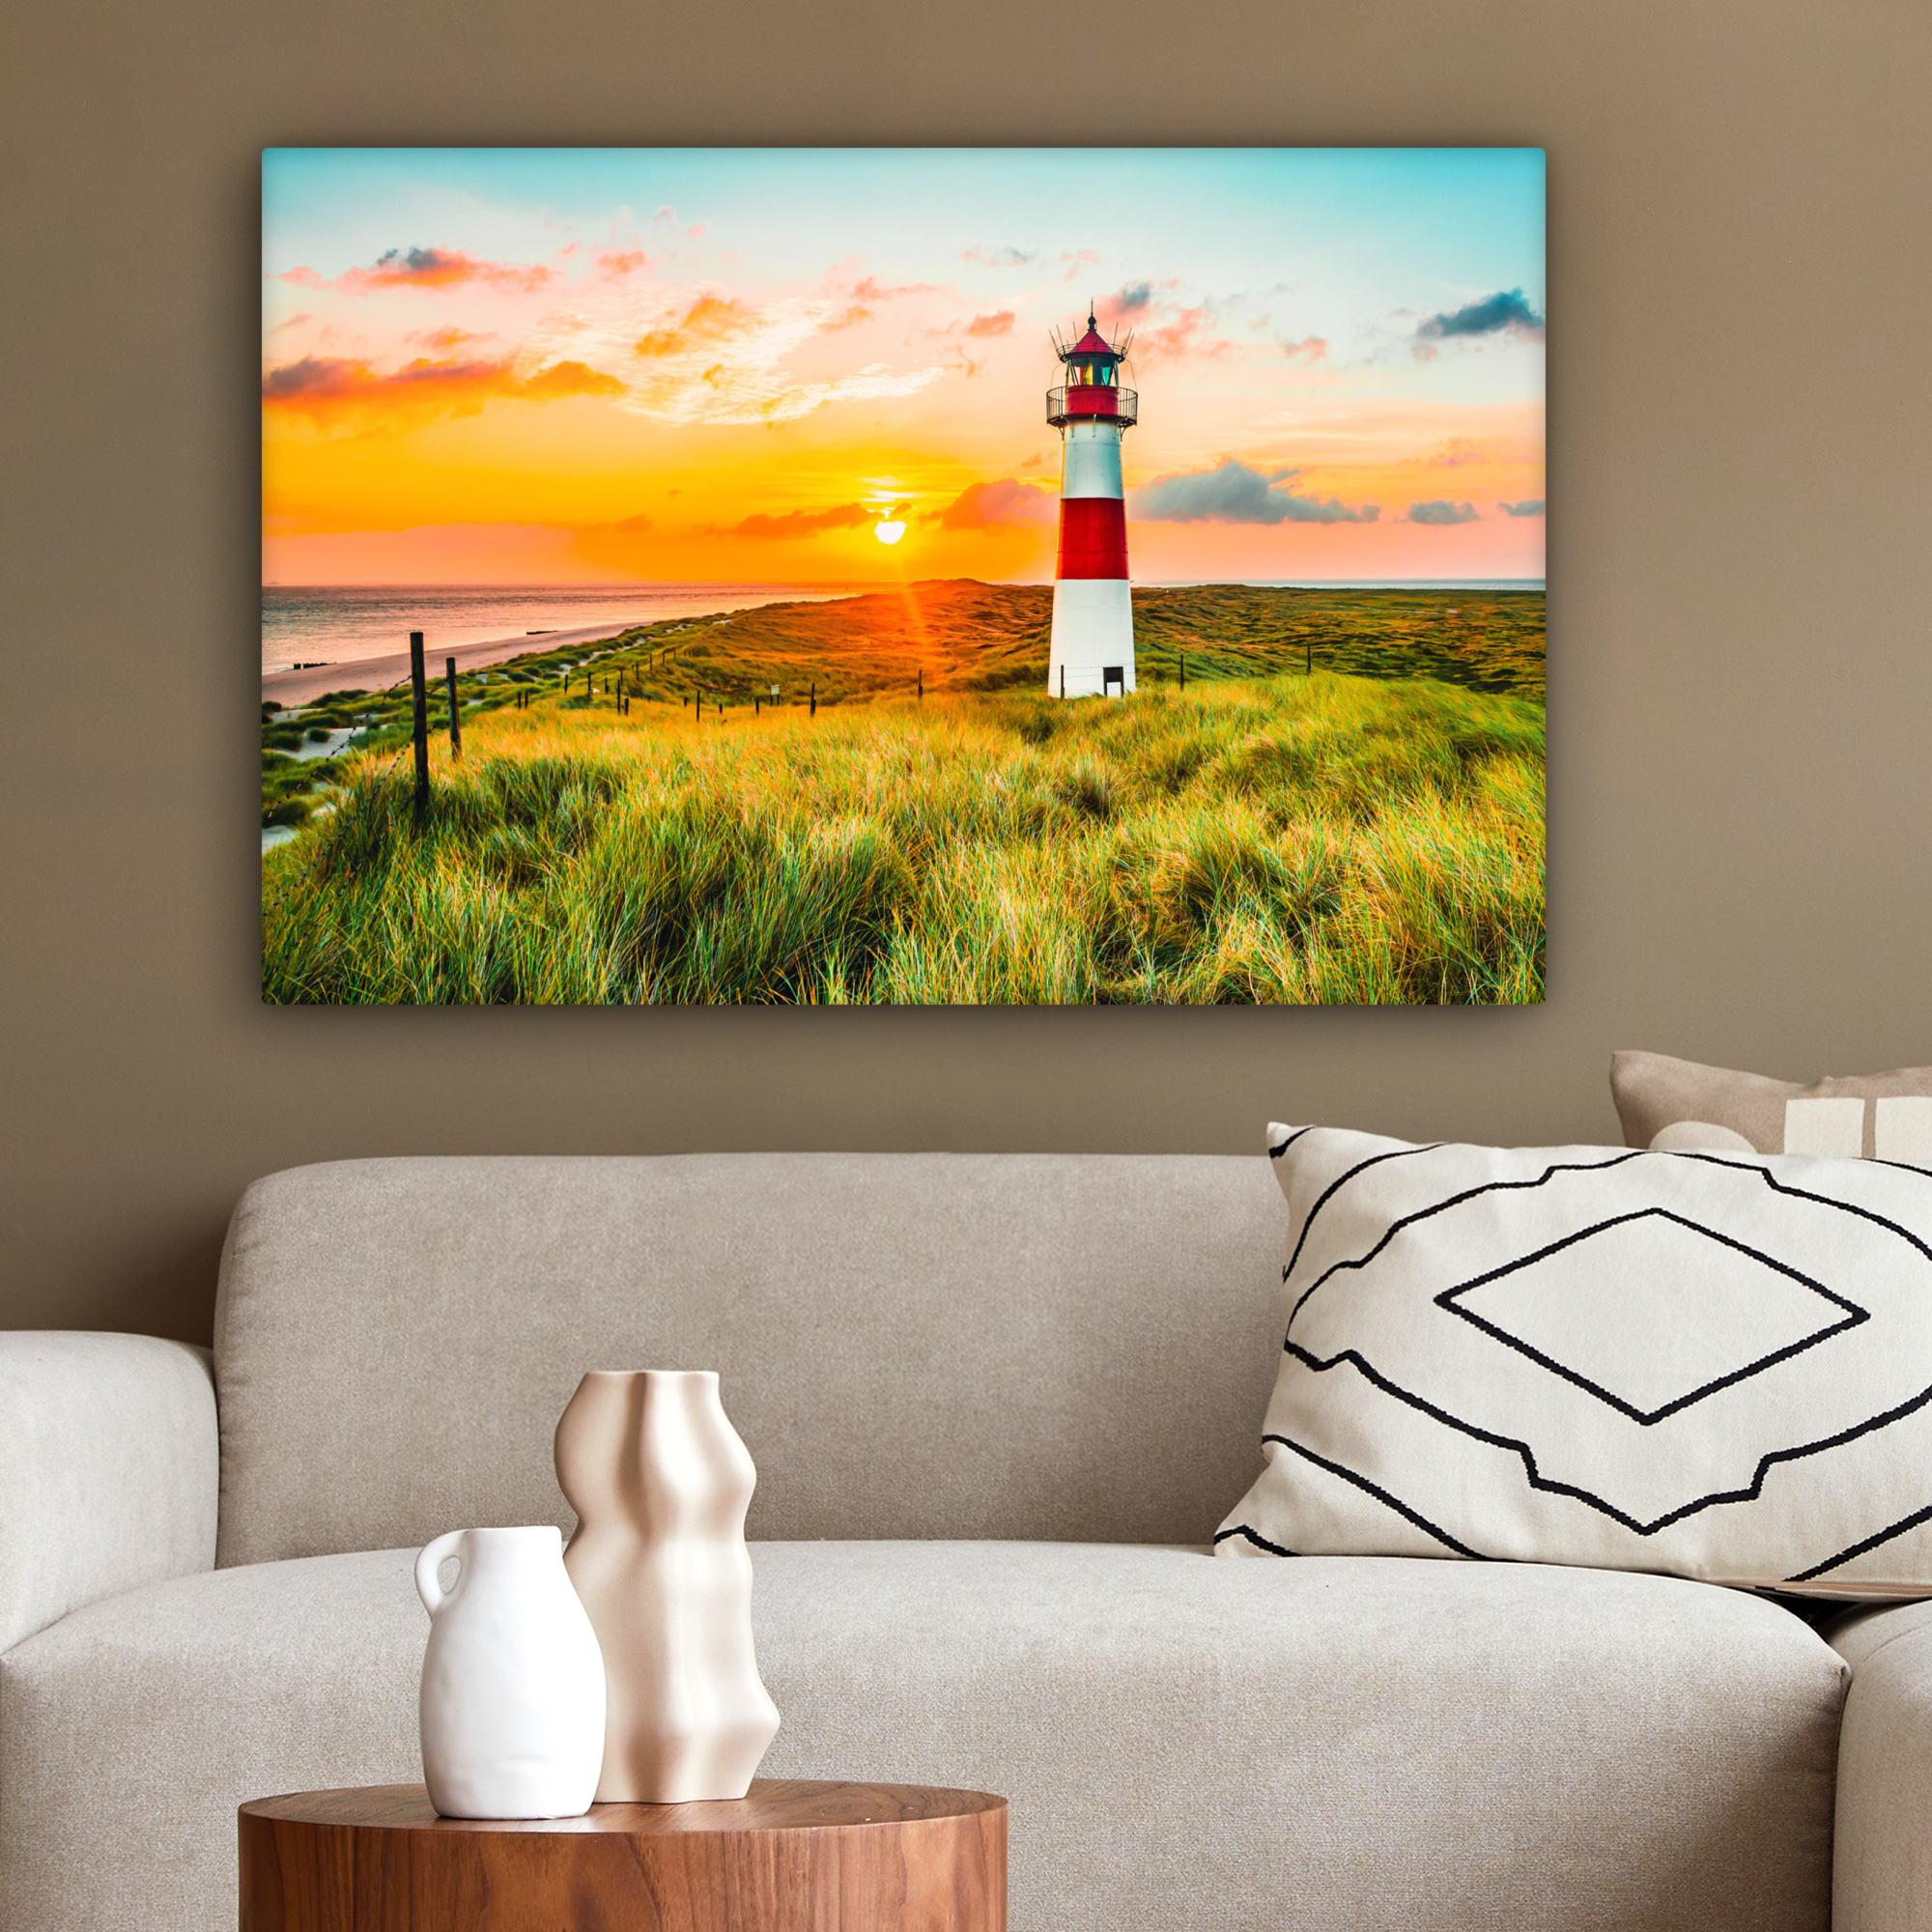 Tableau sur toile - Phare - Nature - Soleil - Paysage - Herbe - Plage - Mer-2